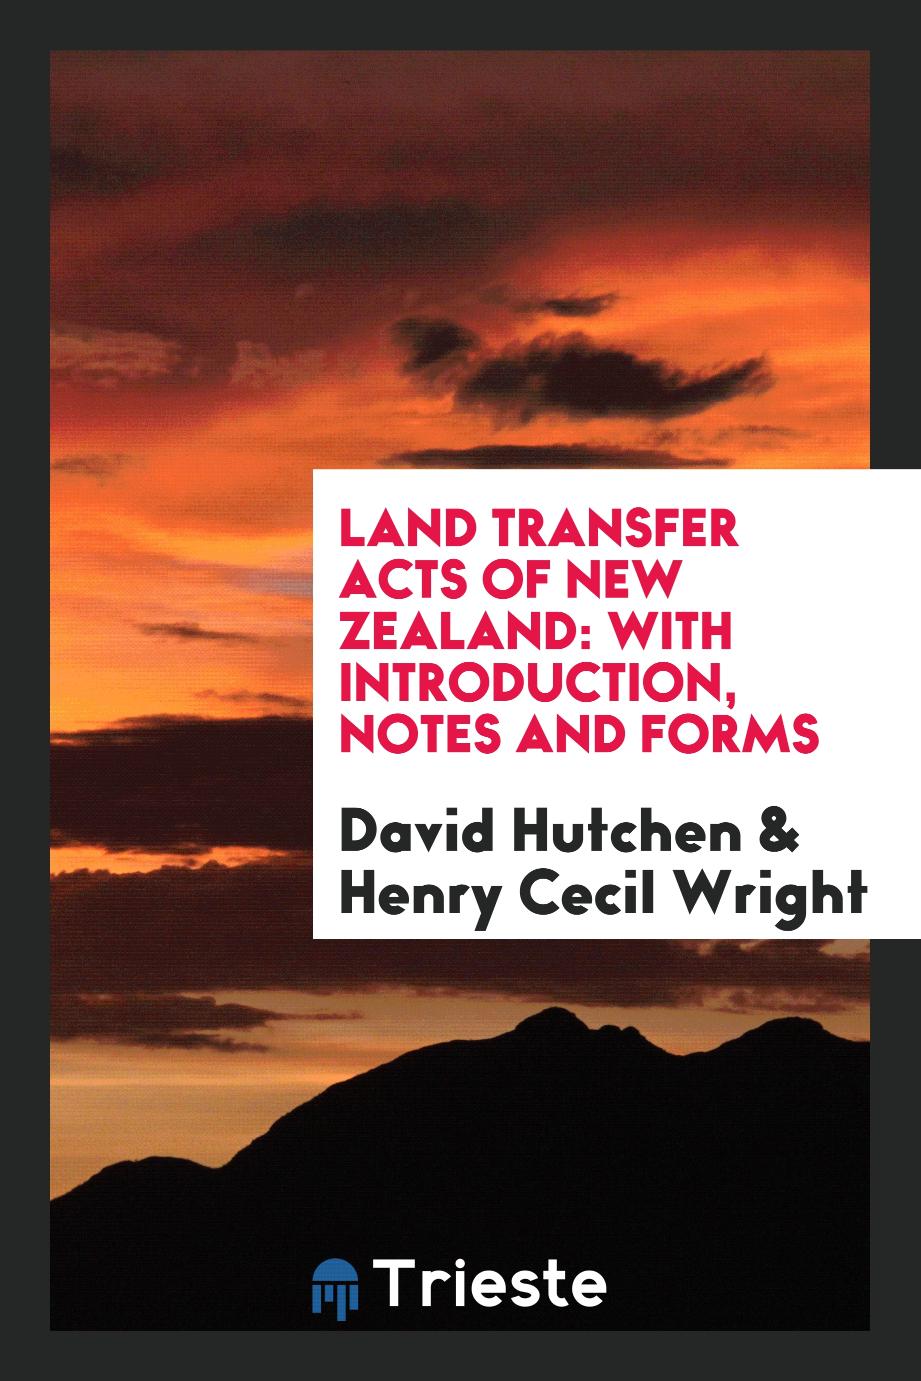 Land Transfer Acts of New Zealand: With Introduction, Notes and Forms